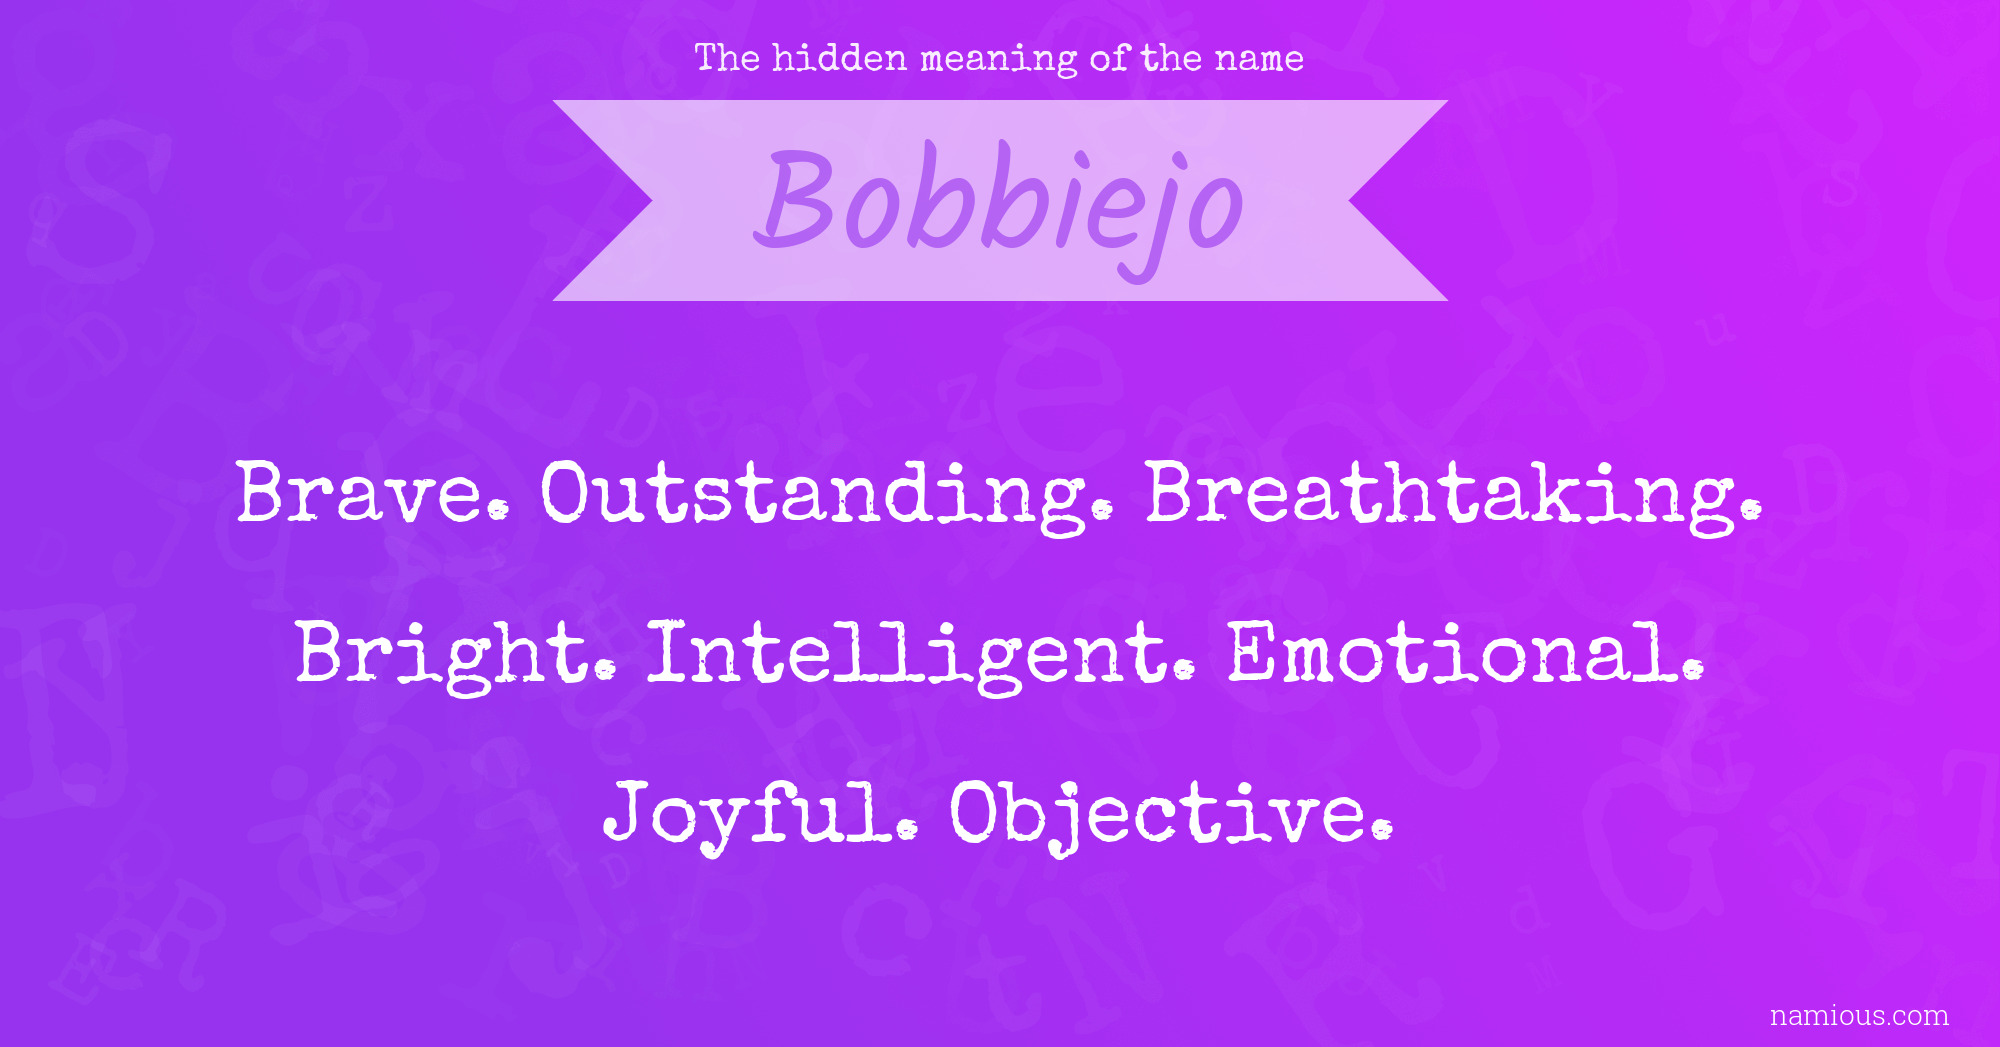 The hidden meaning of the name Bobbiejo